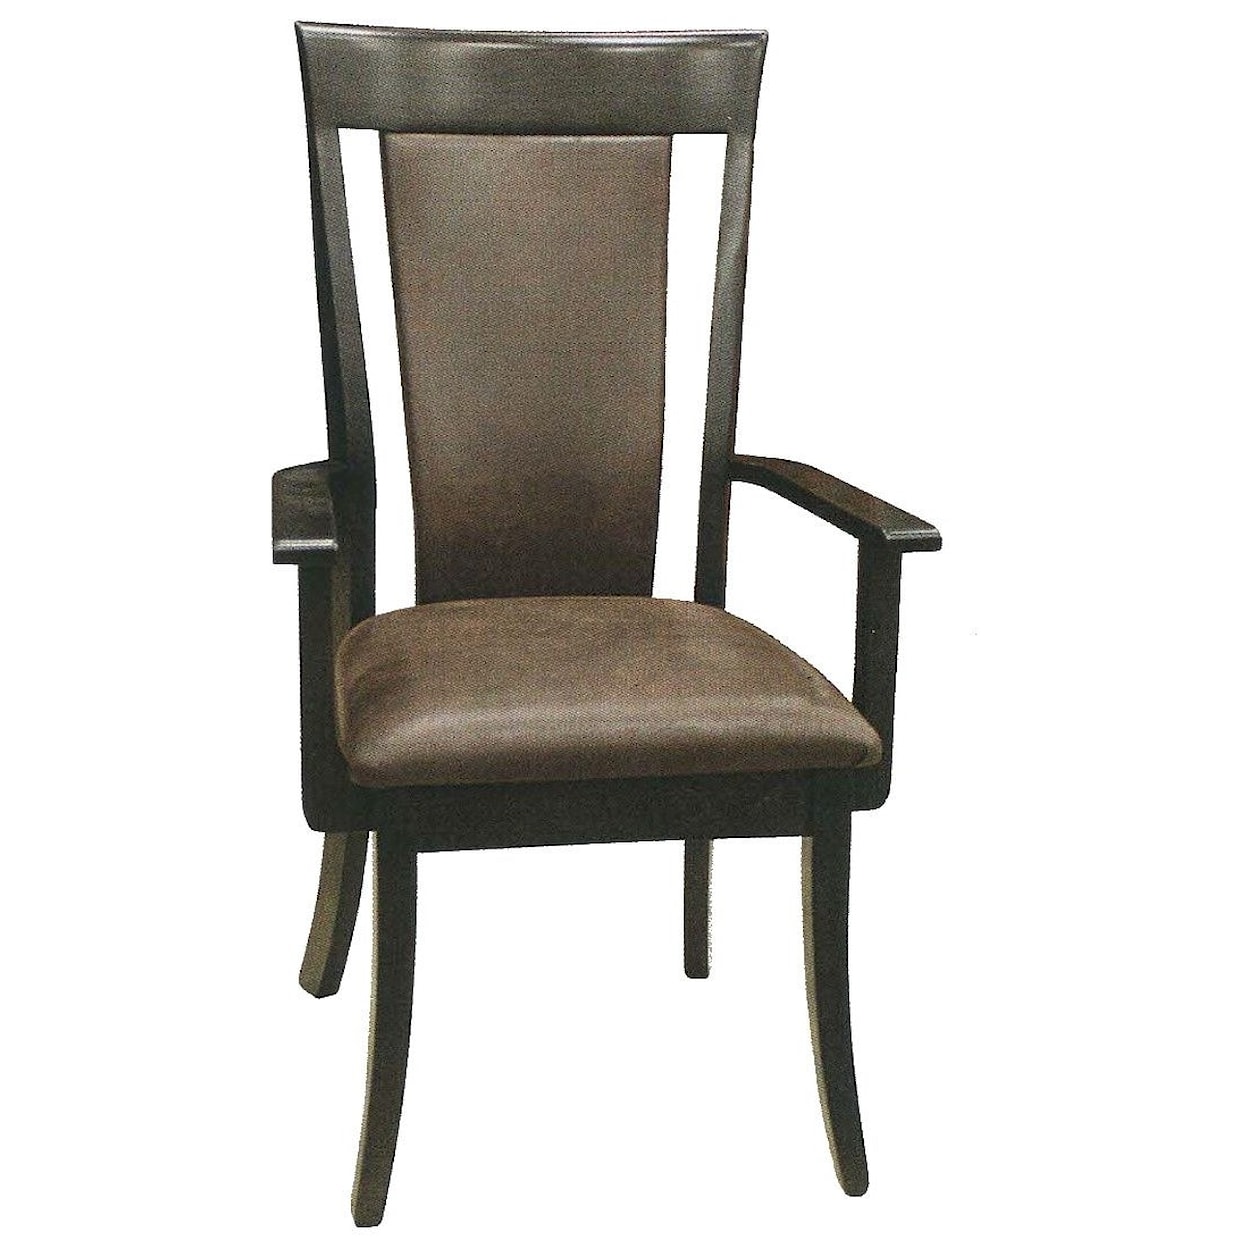 Country Comfort Woodworking Ashley II Arm Chair